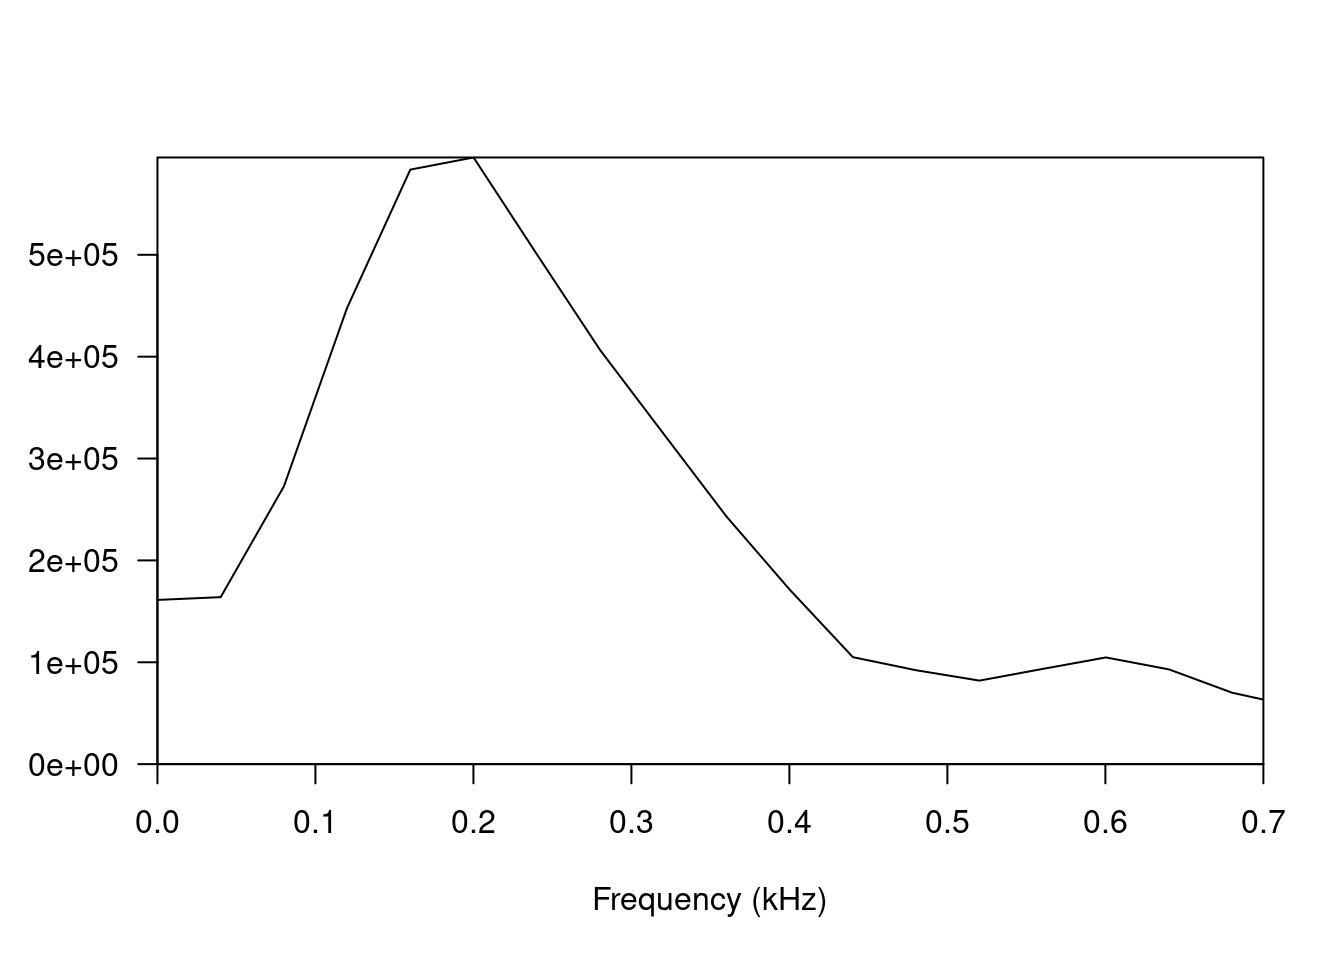 Frequency spectrum of the reference kick sound from 0 to 25 ms.